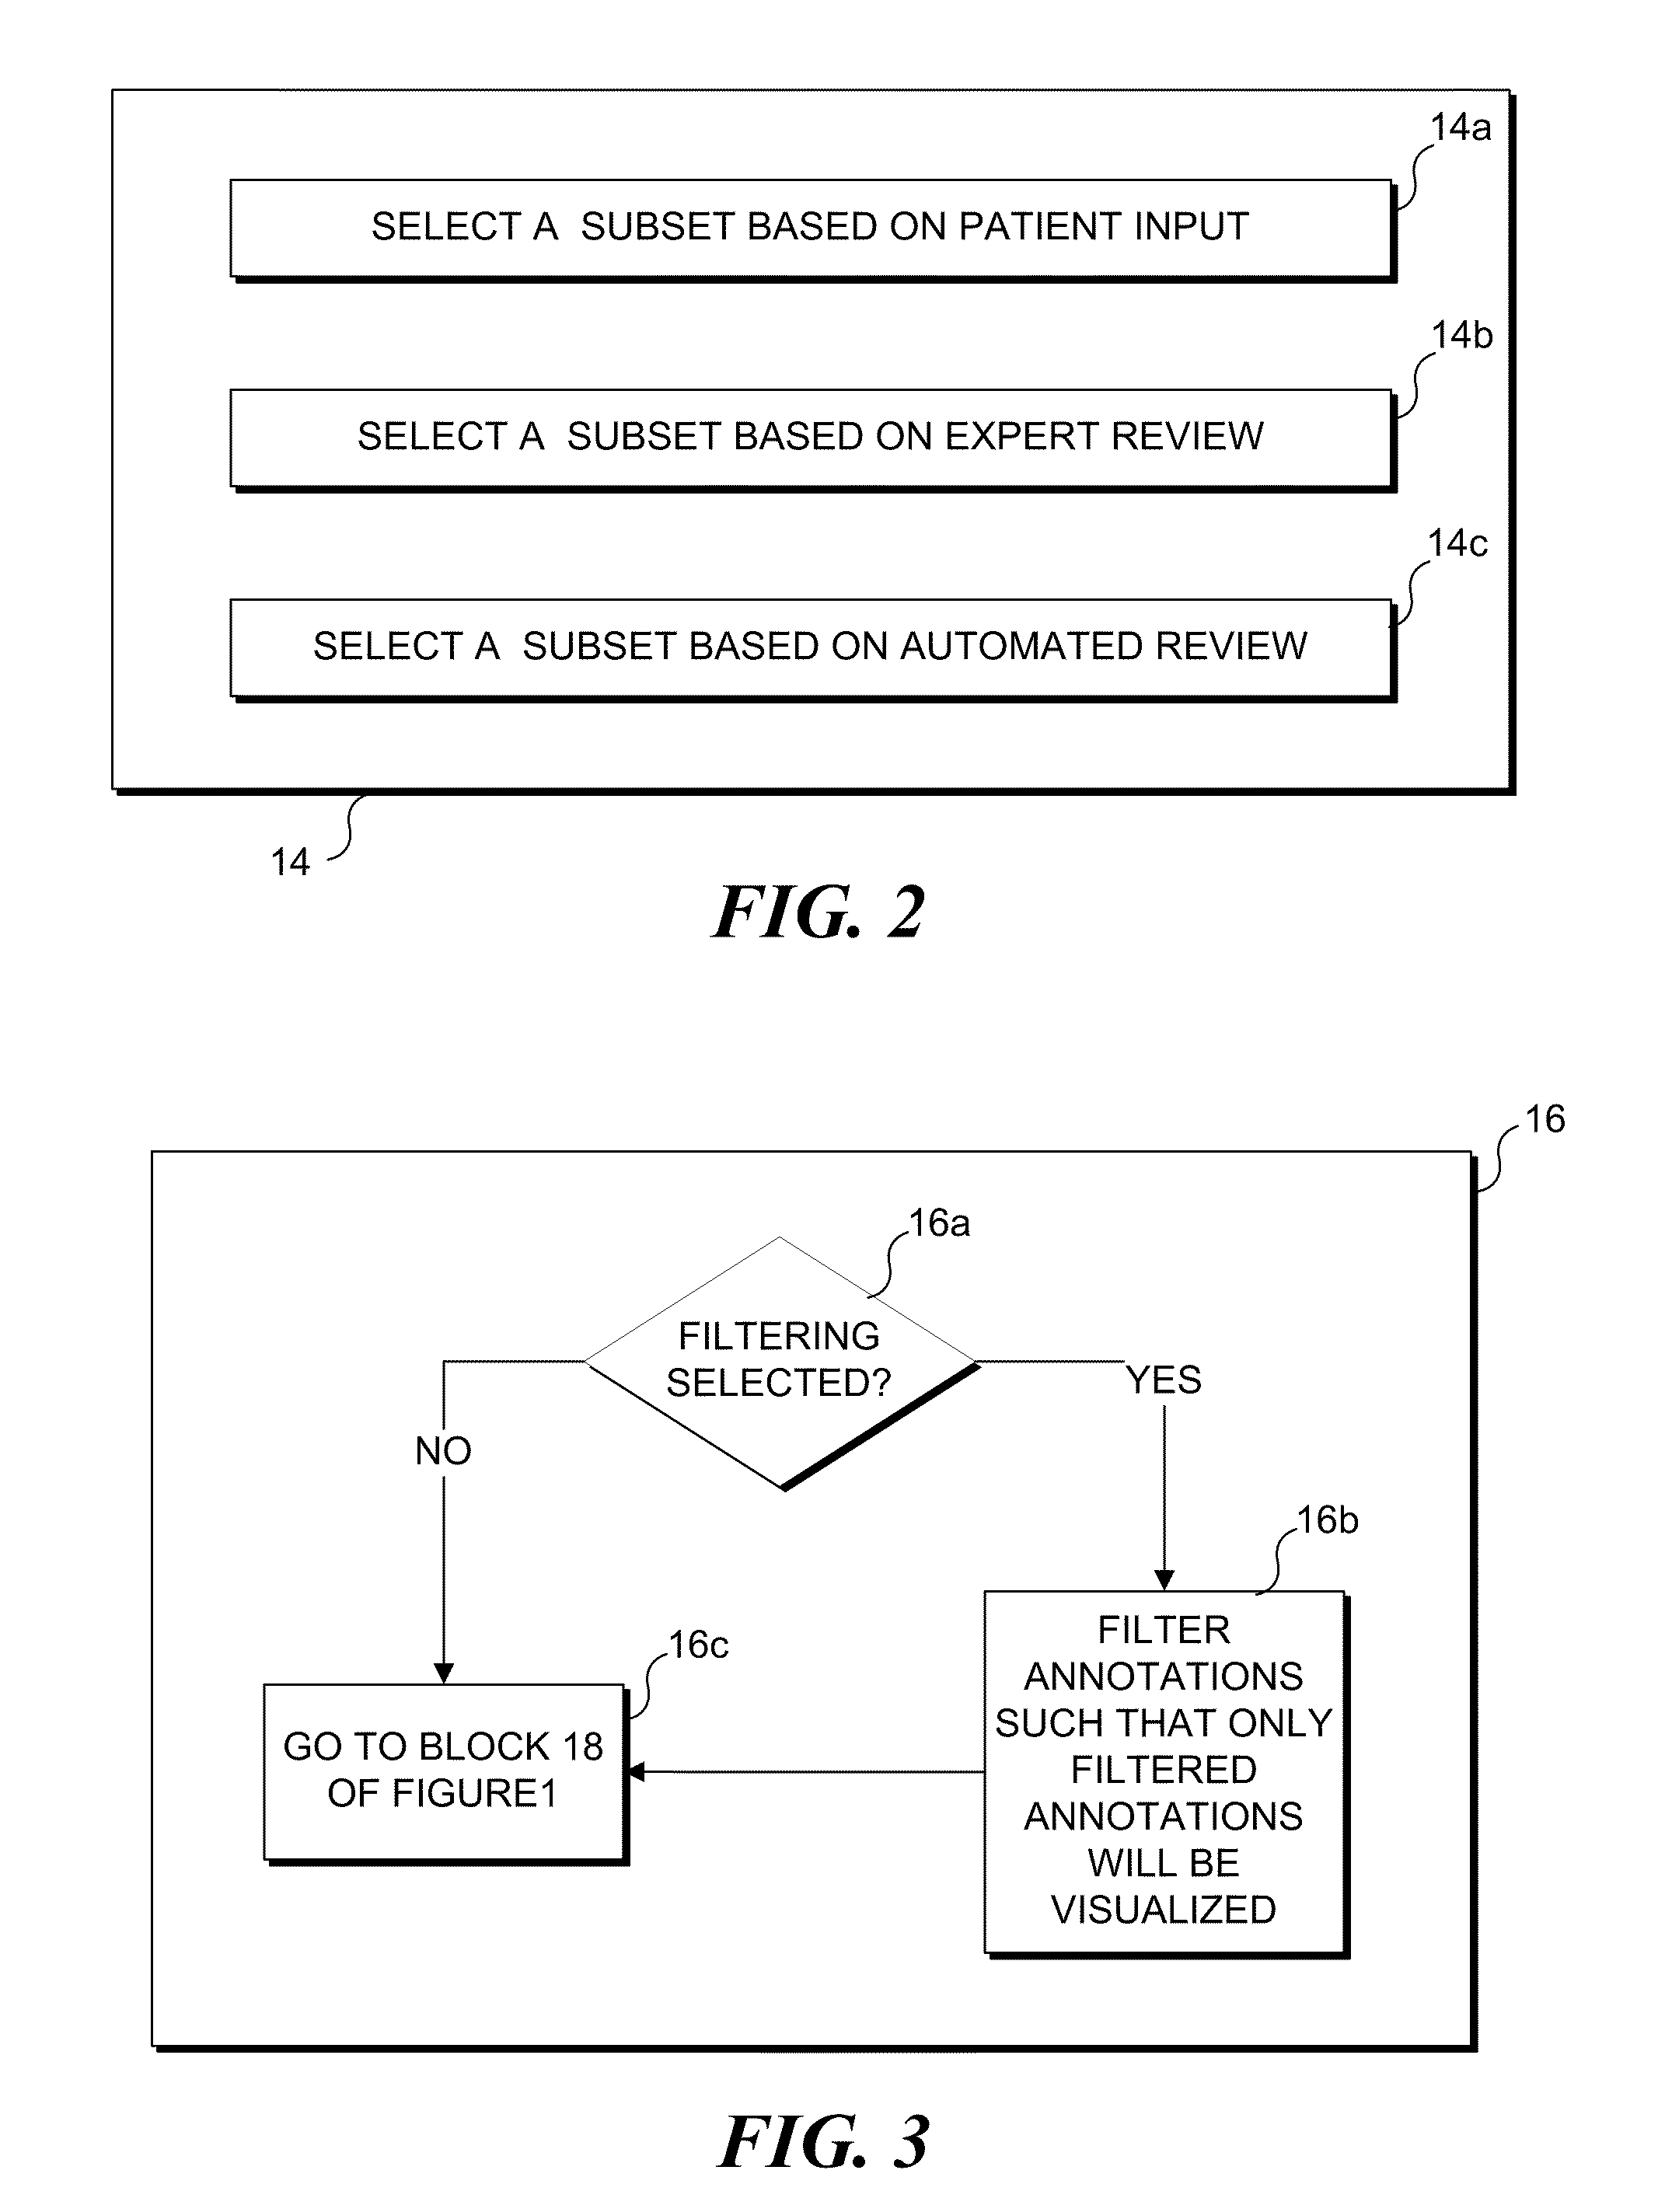 Displaying and Manipulating Brain Function Data Including Enhanced Data Scrolling Functionality